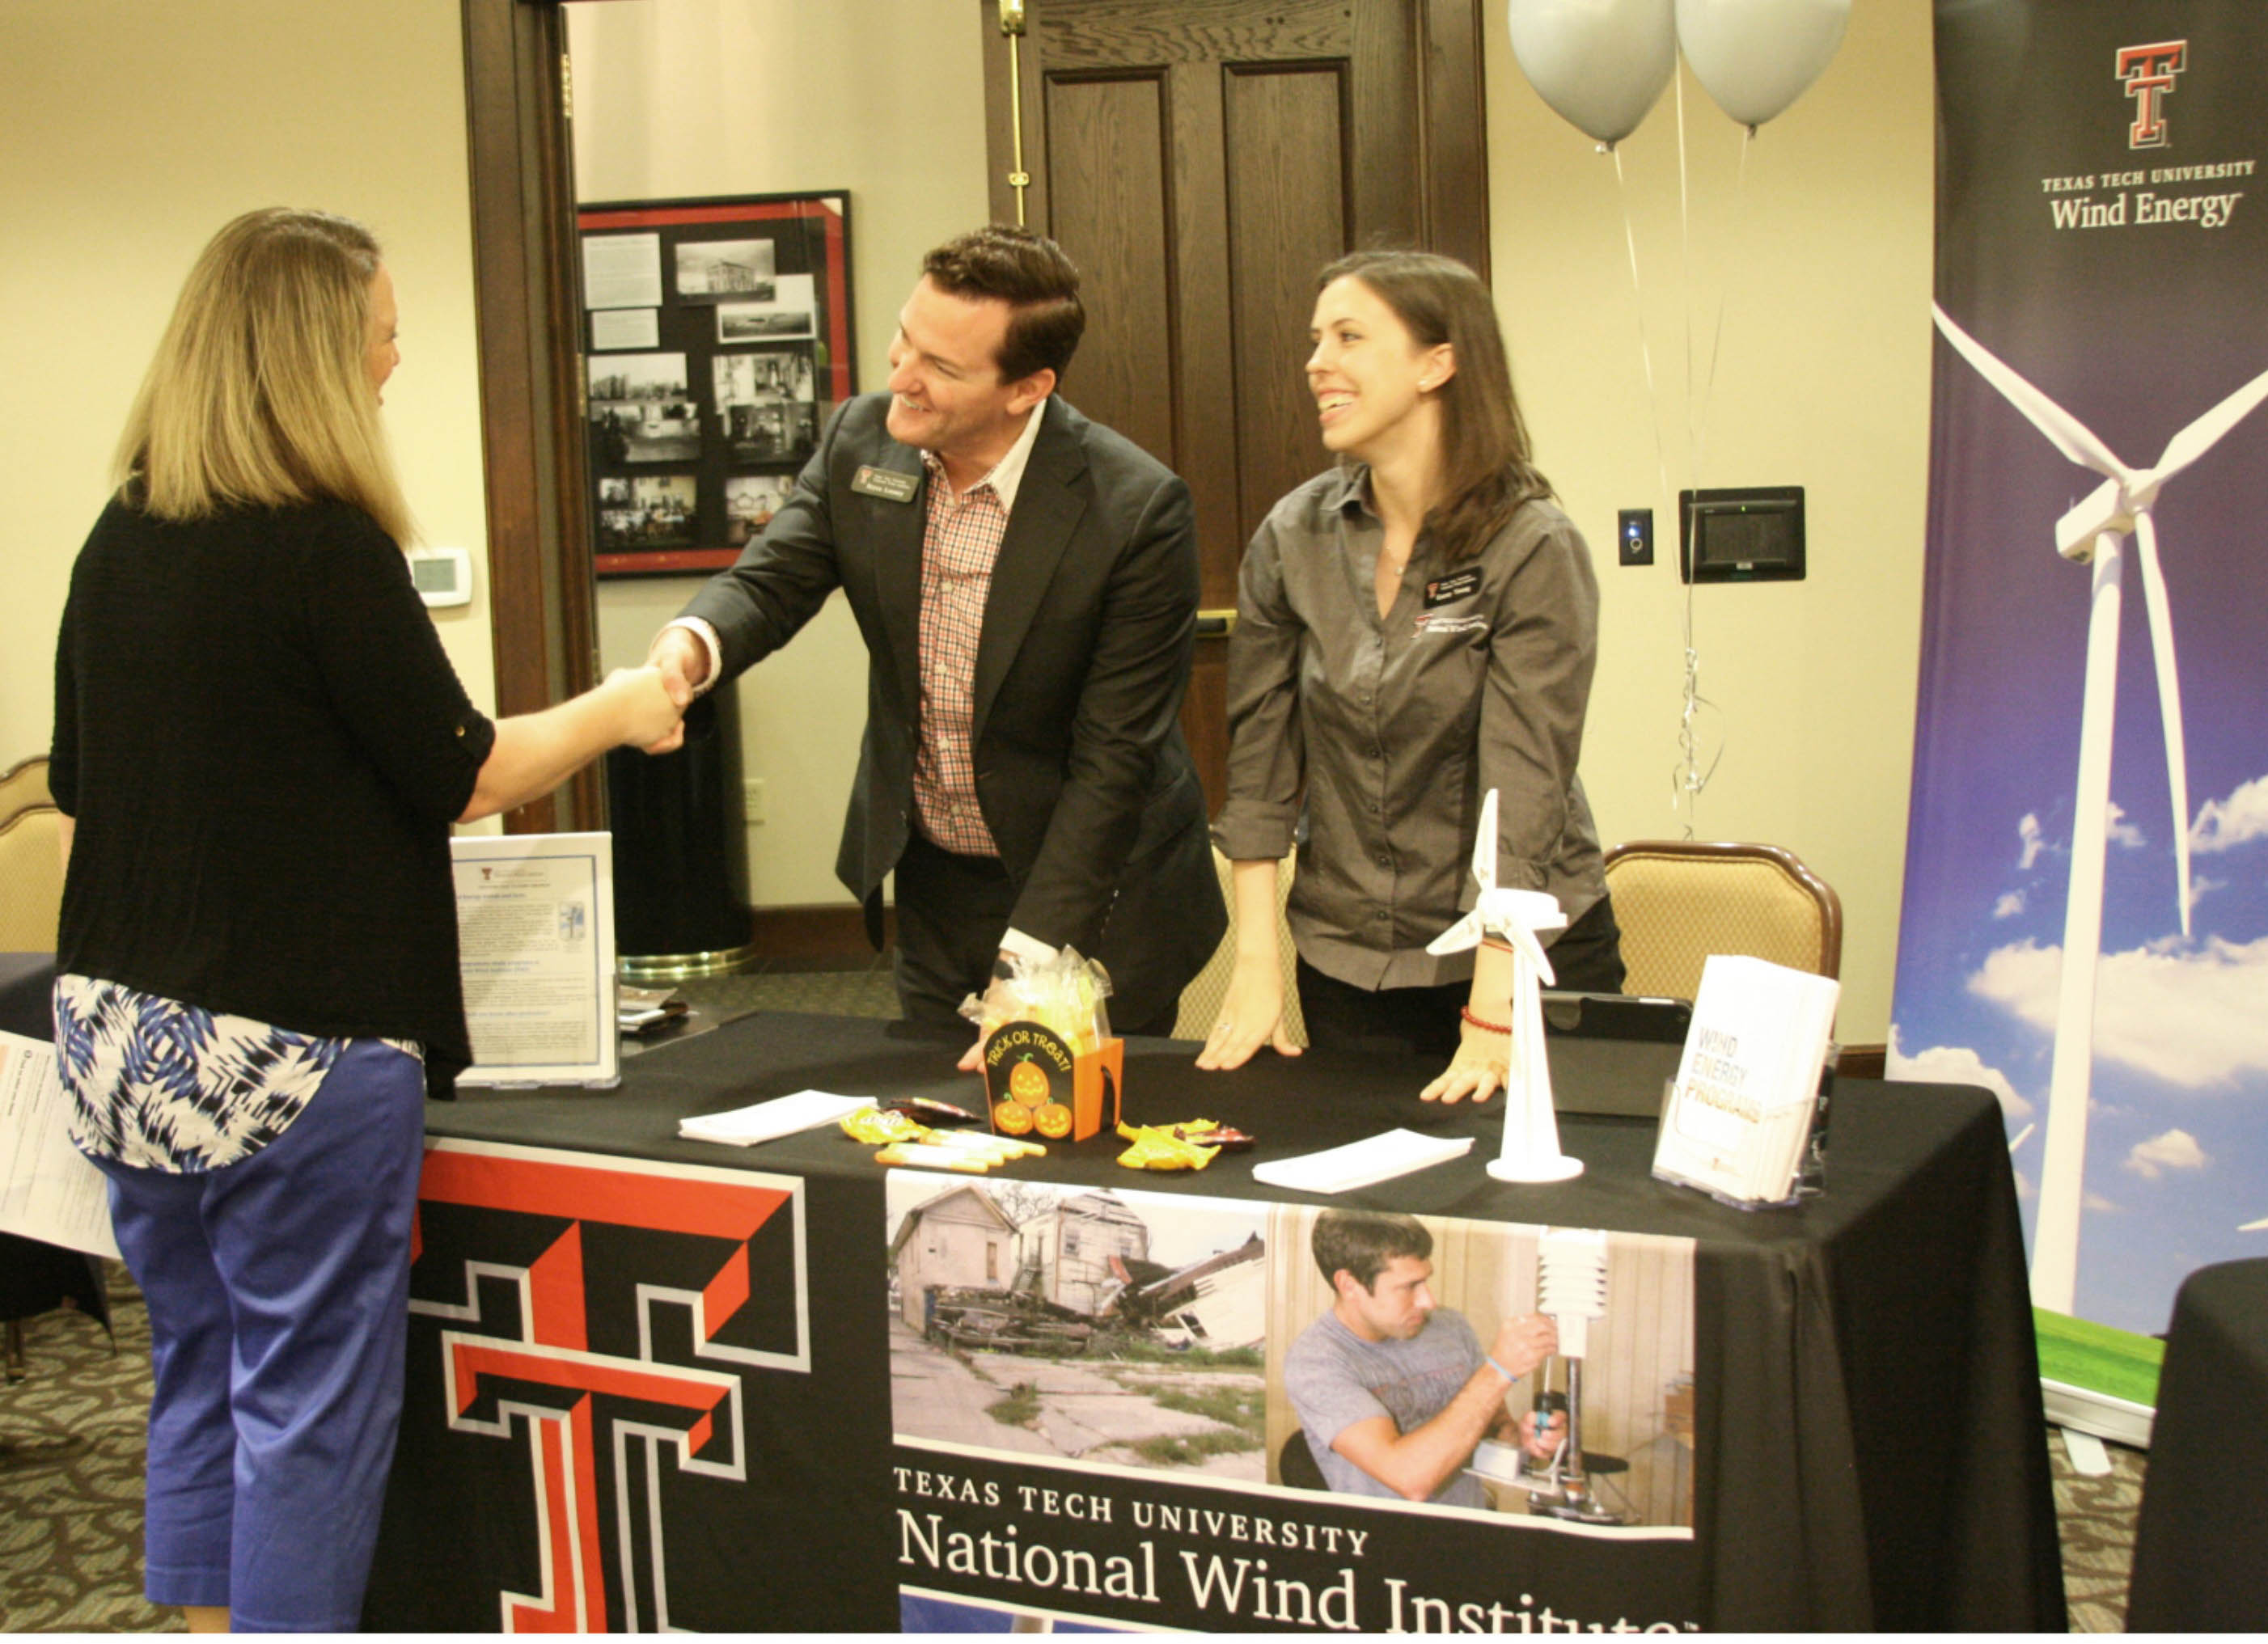 NWI staff welcome students to their informational booth at the TTU Major and Minor Fair